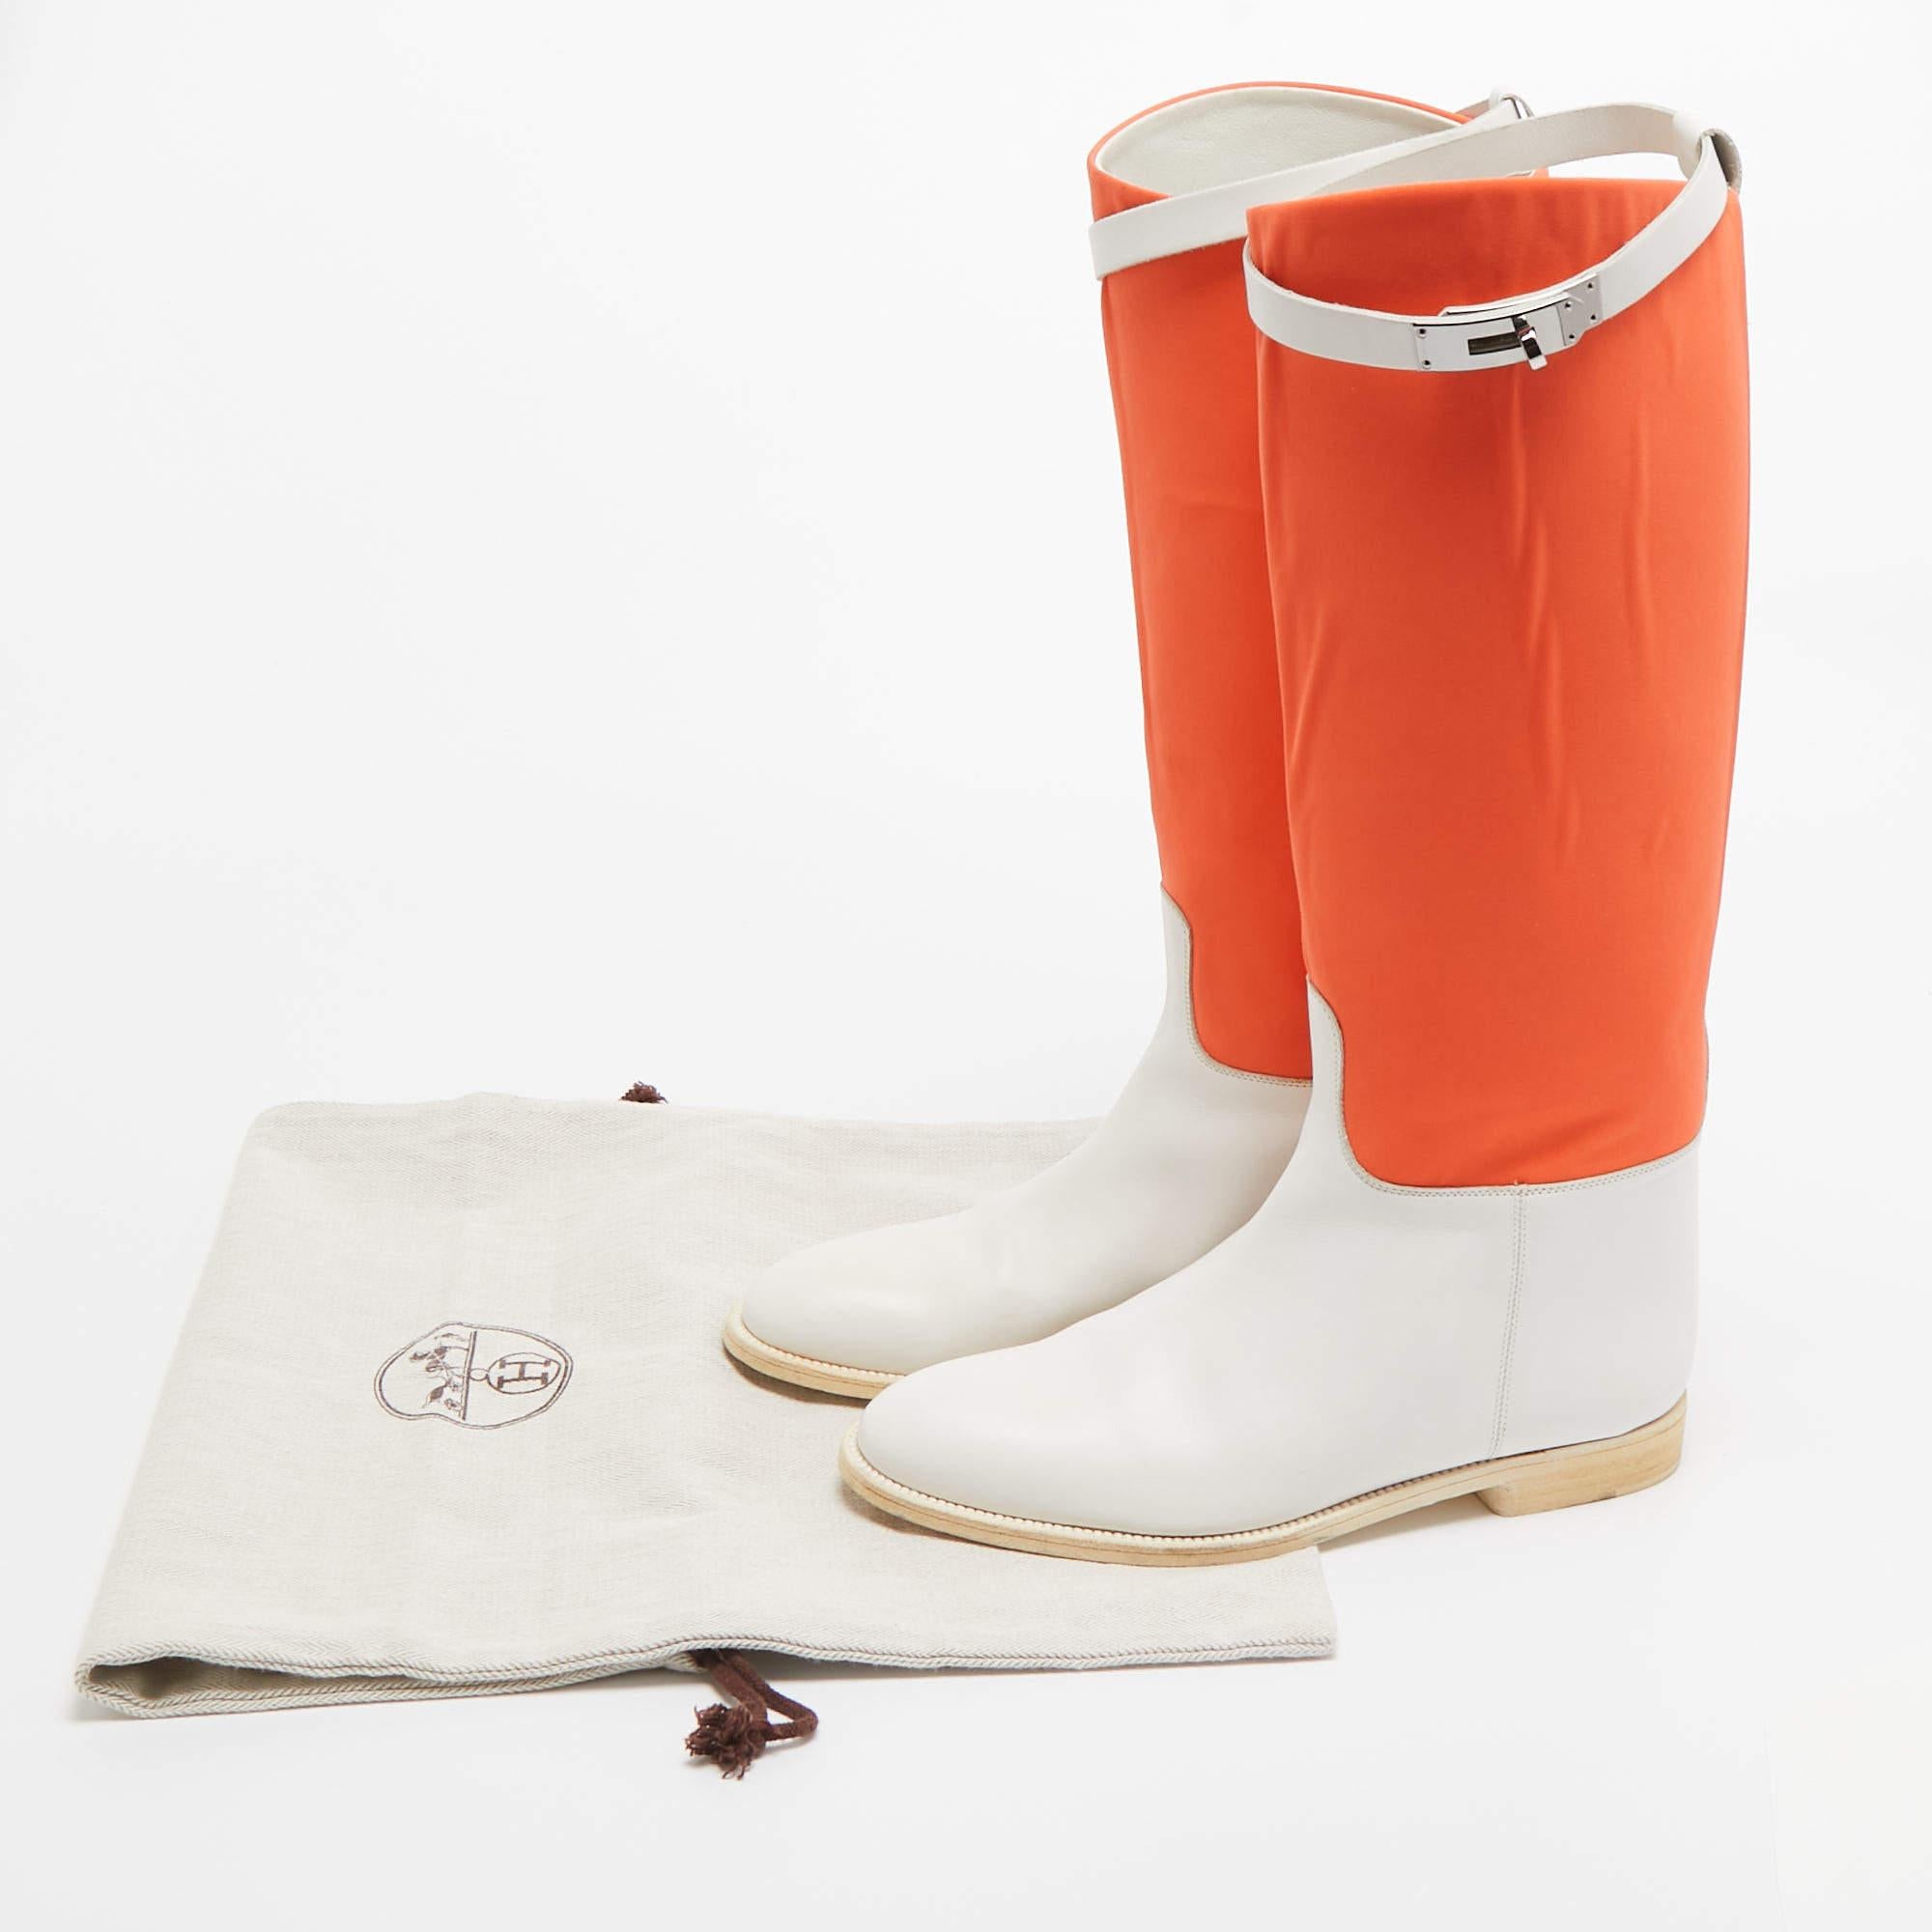 Hermes Neon Orange/White Neoprene and Leather Jumping Boots Size 39 For Sale 4